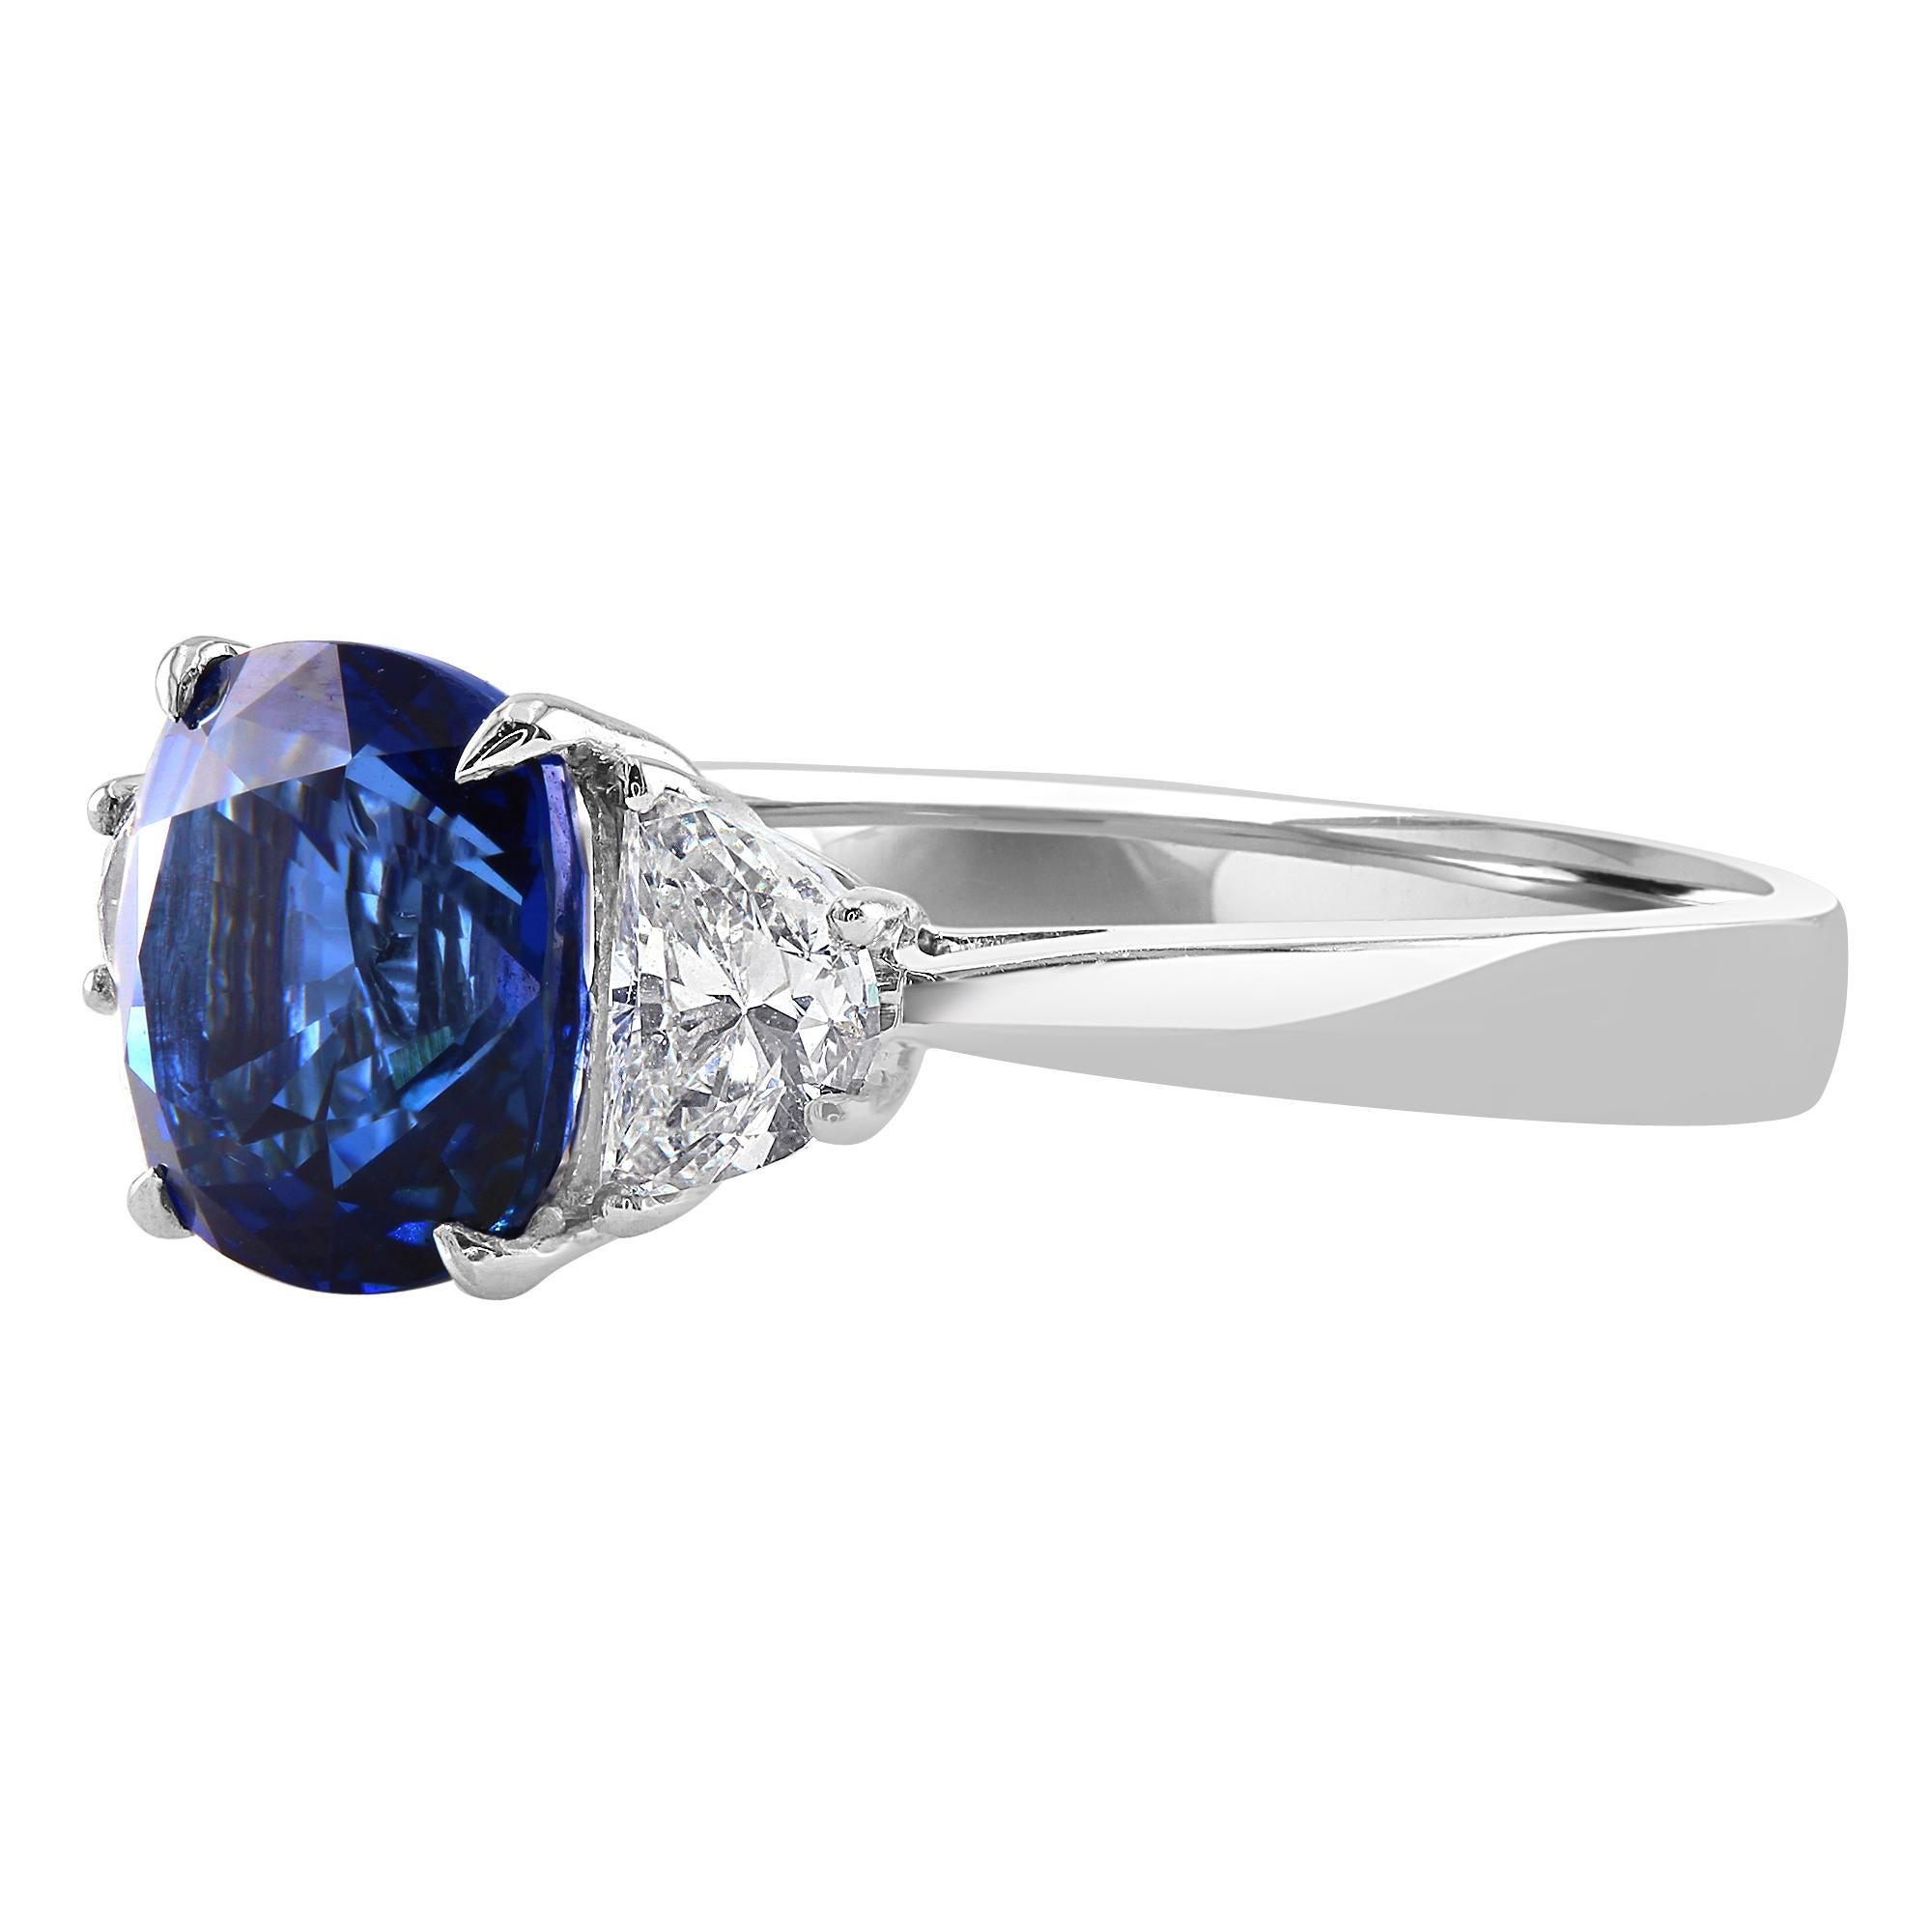 This beautiful ring features a 2.66 carat cushion blue sapphire, set between two half moons, 0.55 carat total weight. 

Introducing a gorgeous colored gemstone engagement ring that will surely be a one of a kind look for any lucky lady. If you are